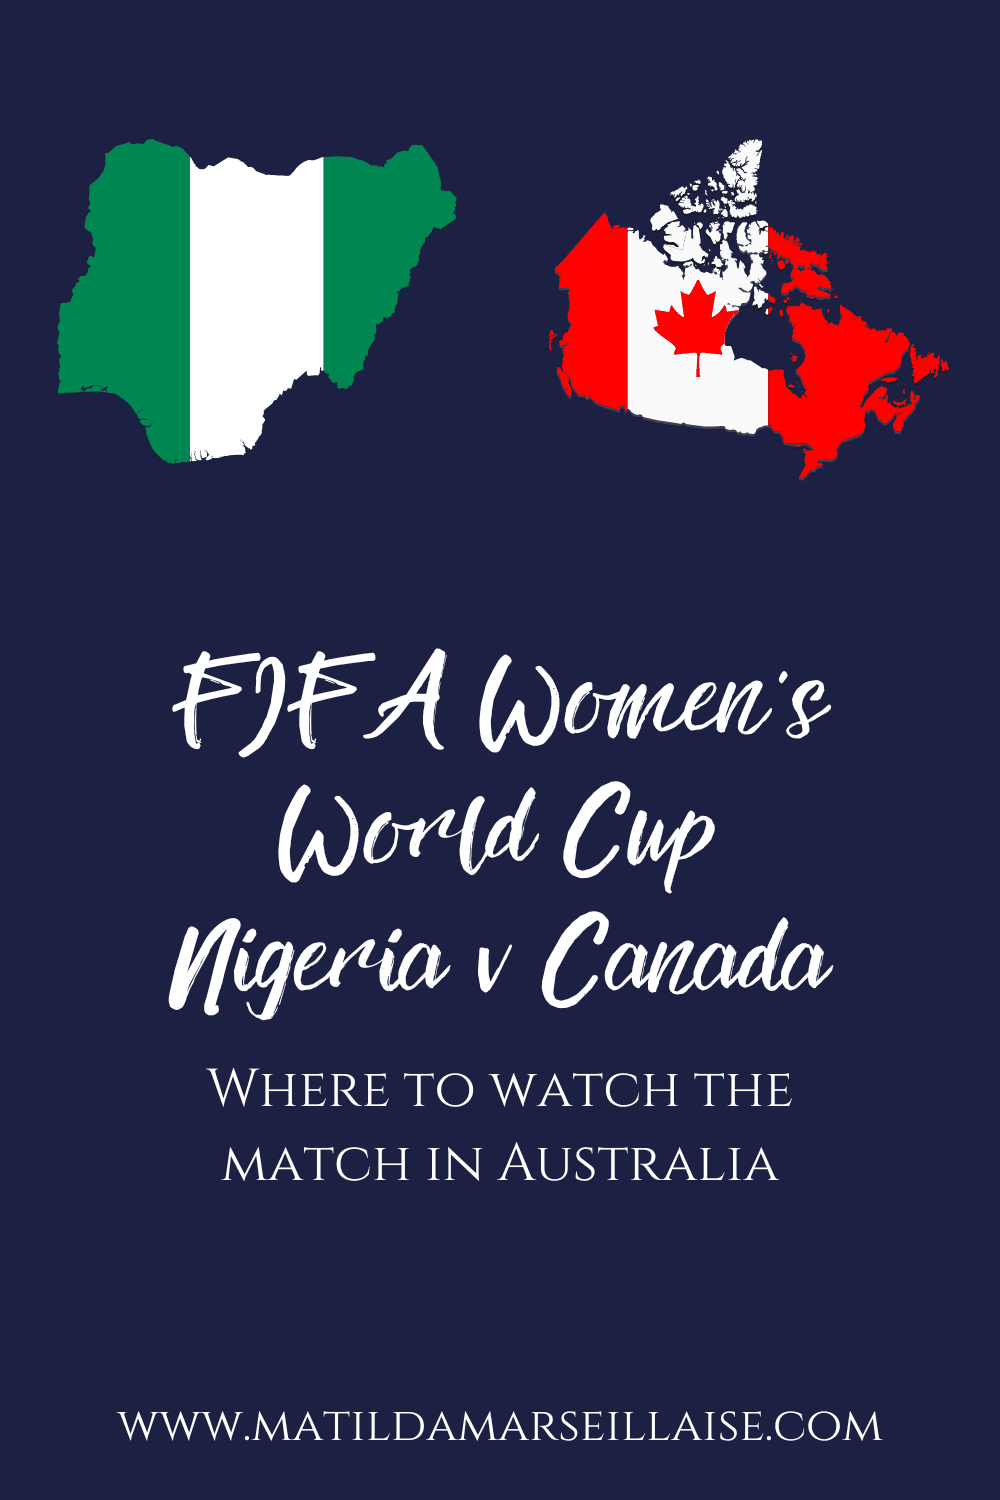 Where to watch FIFA Women’s World Cup Nigeria vs Canada in Australia this Friday